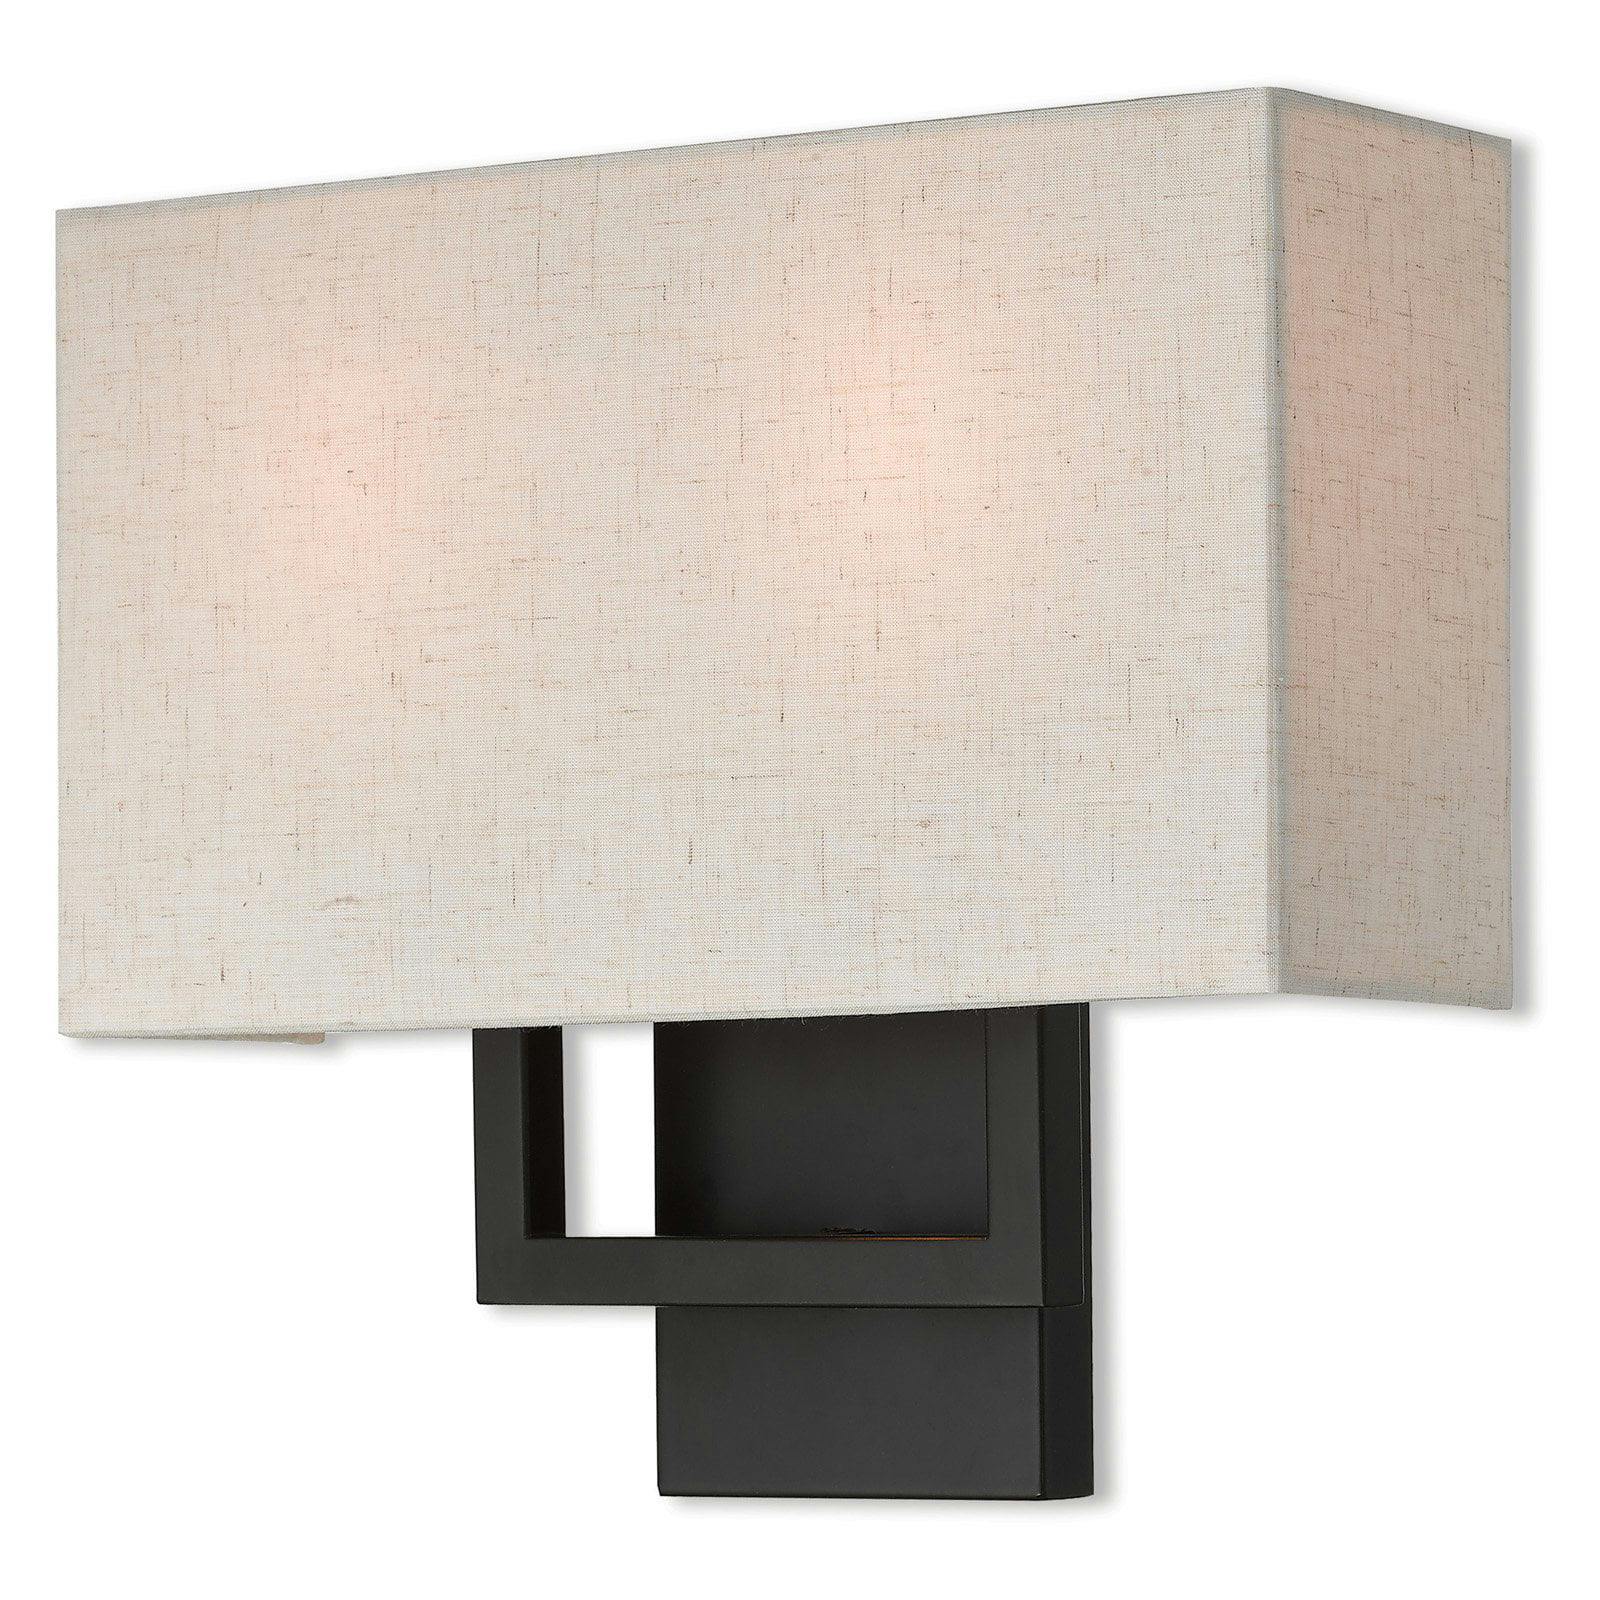 Pierson Bronze 2-Light ADA Compliant Wall Sconce with Oatmeal Shade